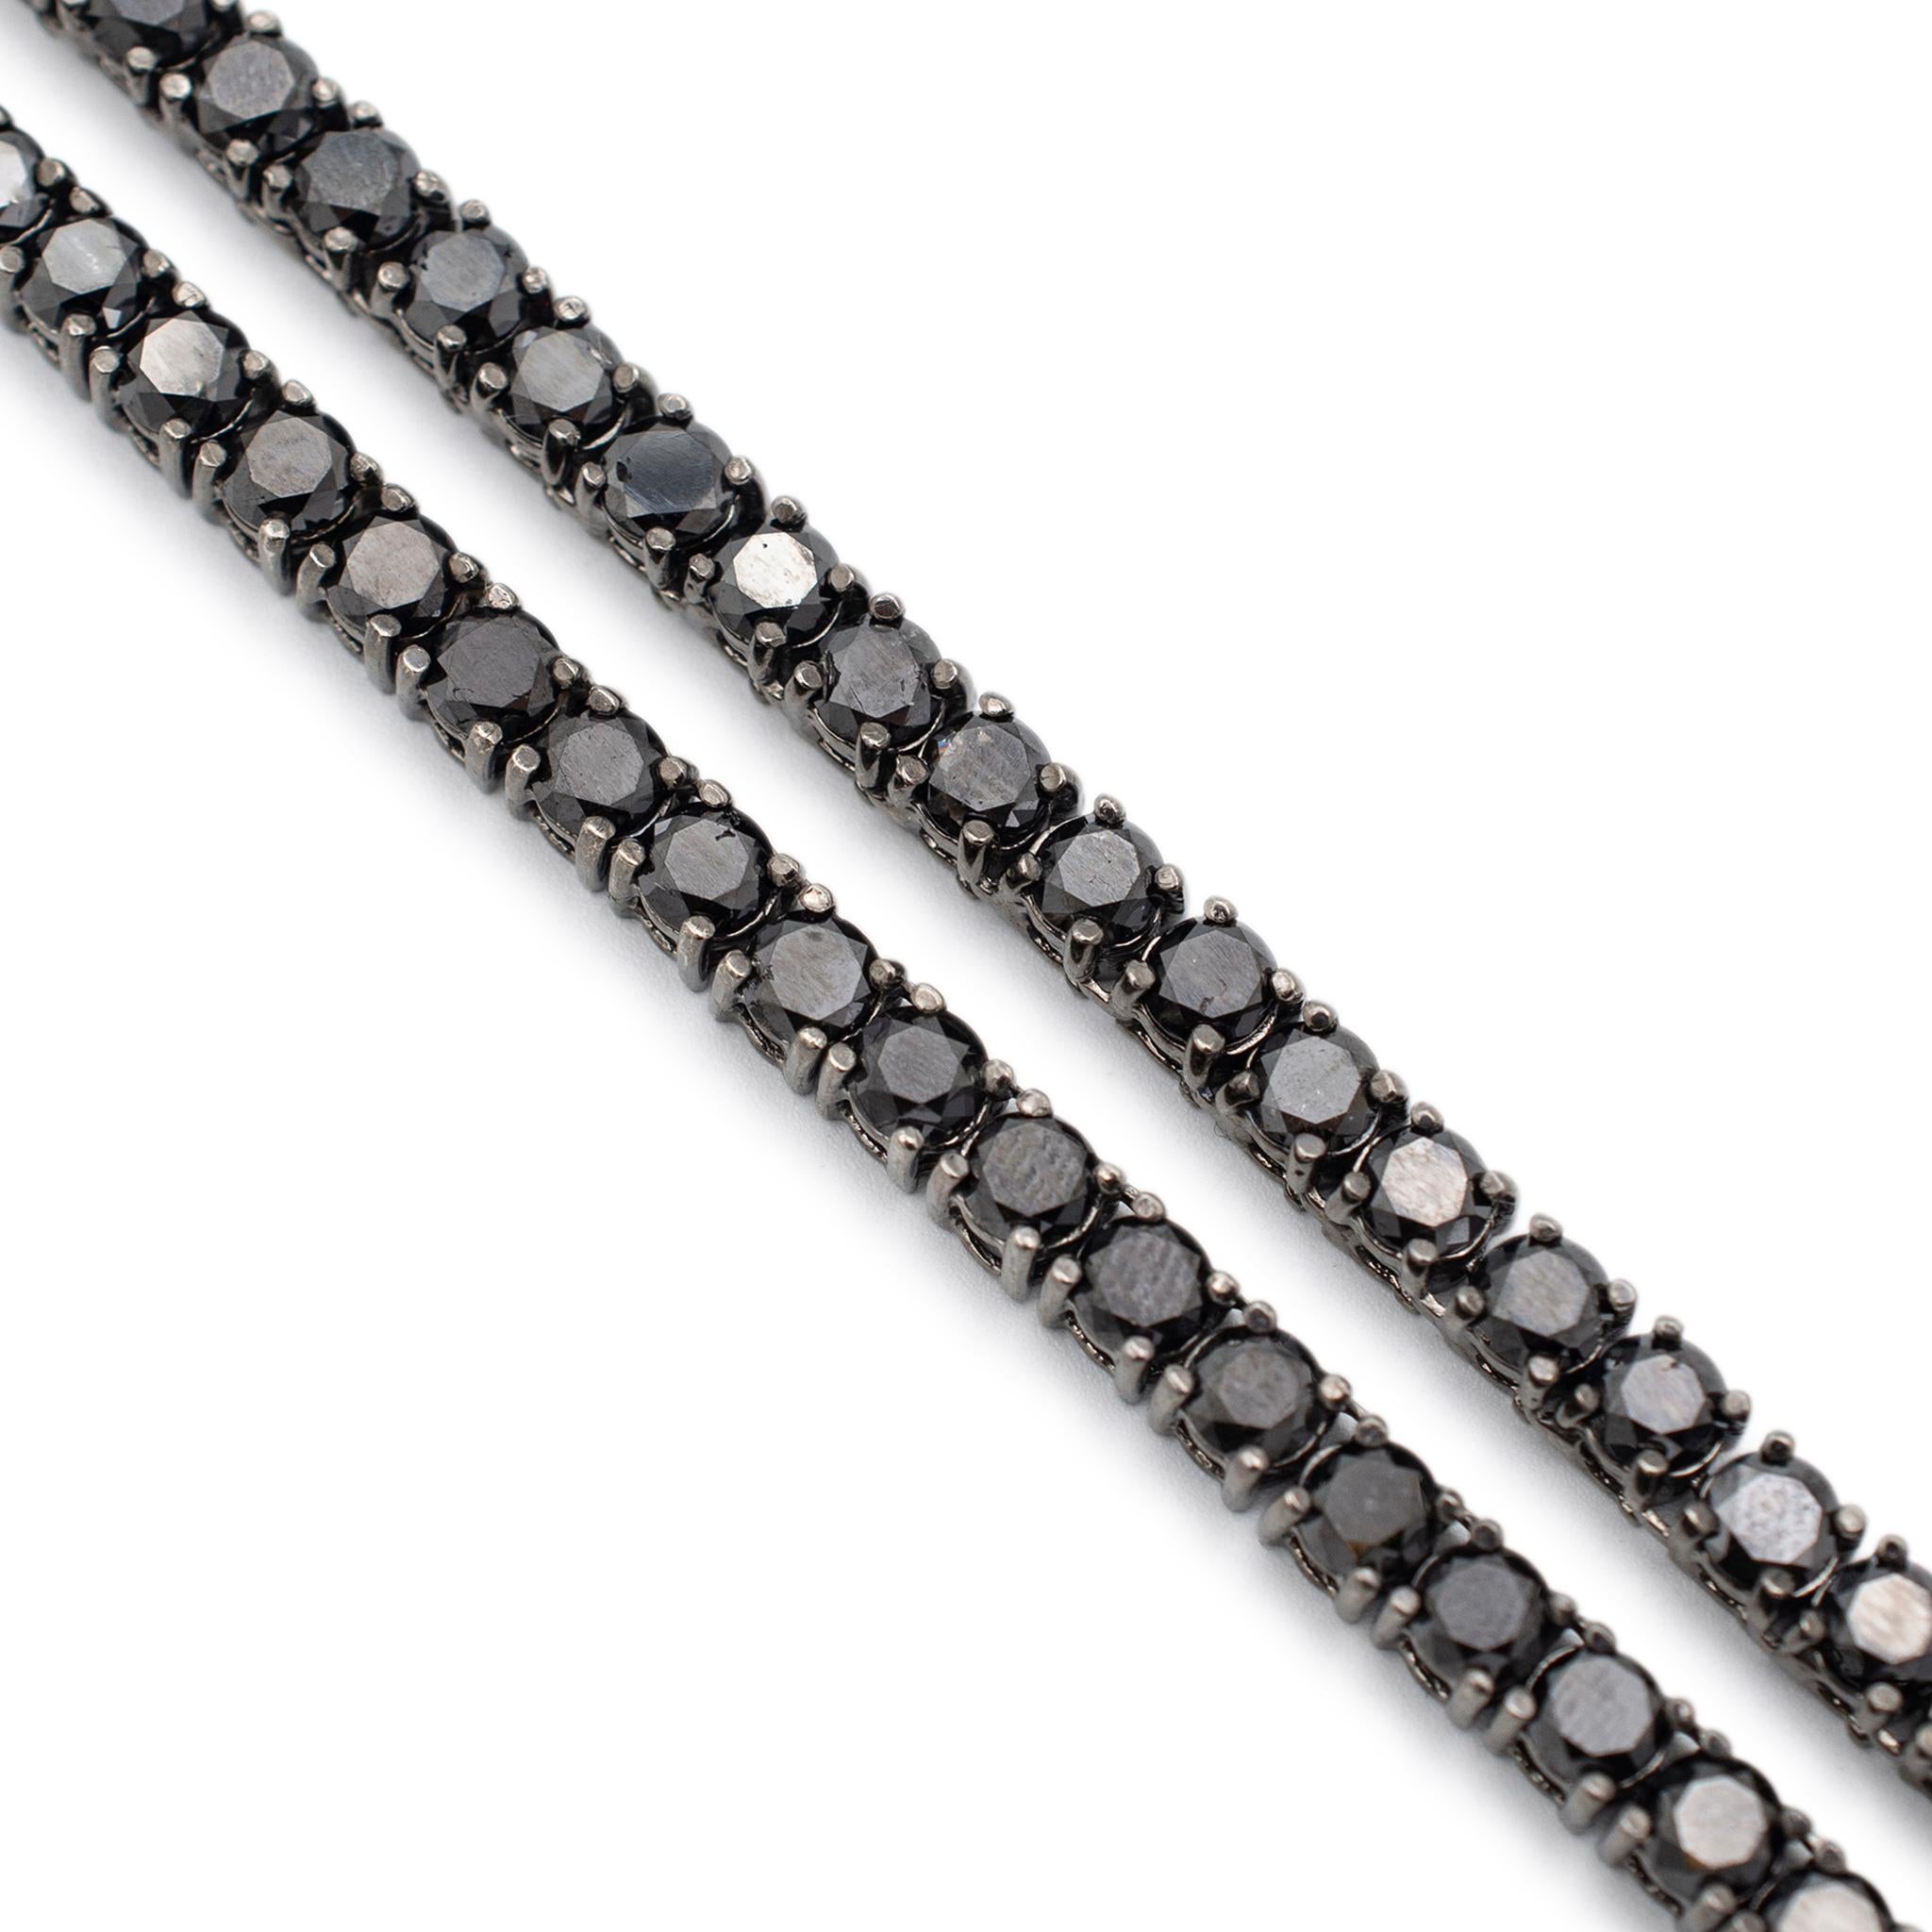 Gender: Unisex

Metal Type: 10K White Gold & Black Rhodium

Length: 44.00 Inches

Width: 5.30 mm

Weight: 111.04 grams

Black rhodium plated 10K white gold single strand rope diamond necklace. The metal was tested and determined to be 10K white